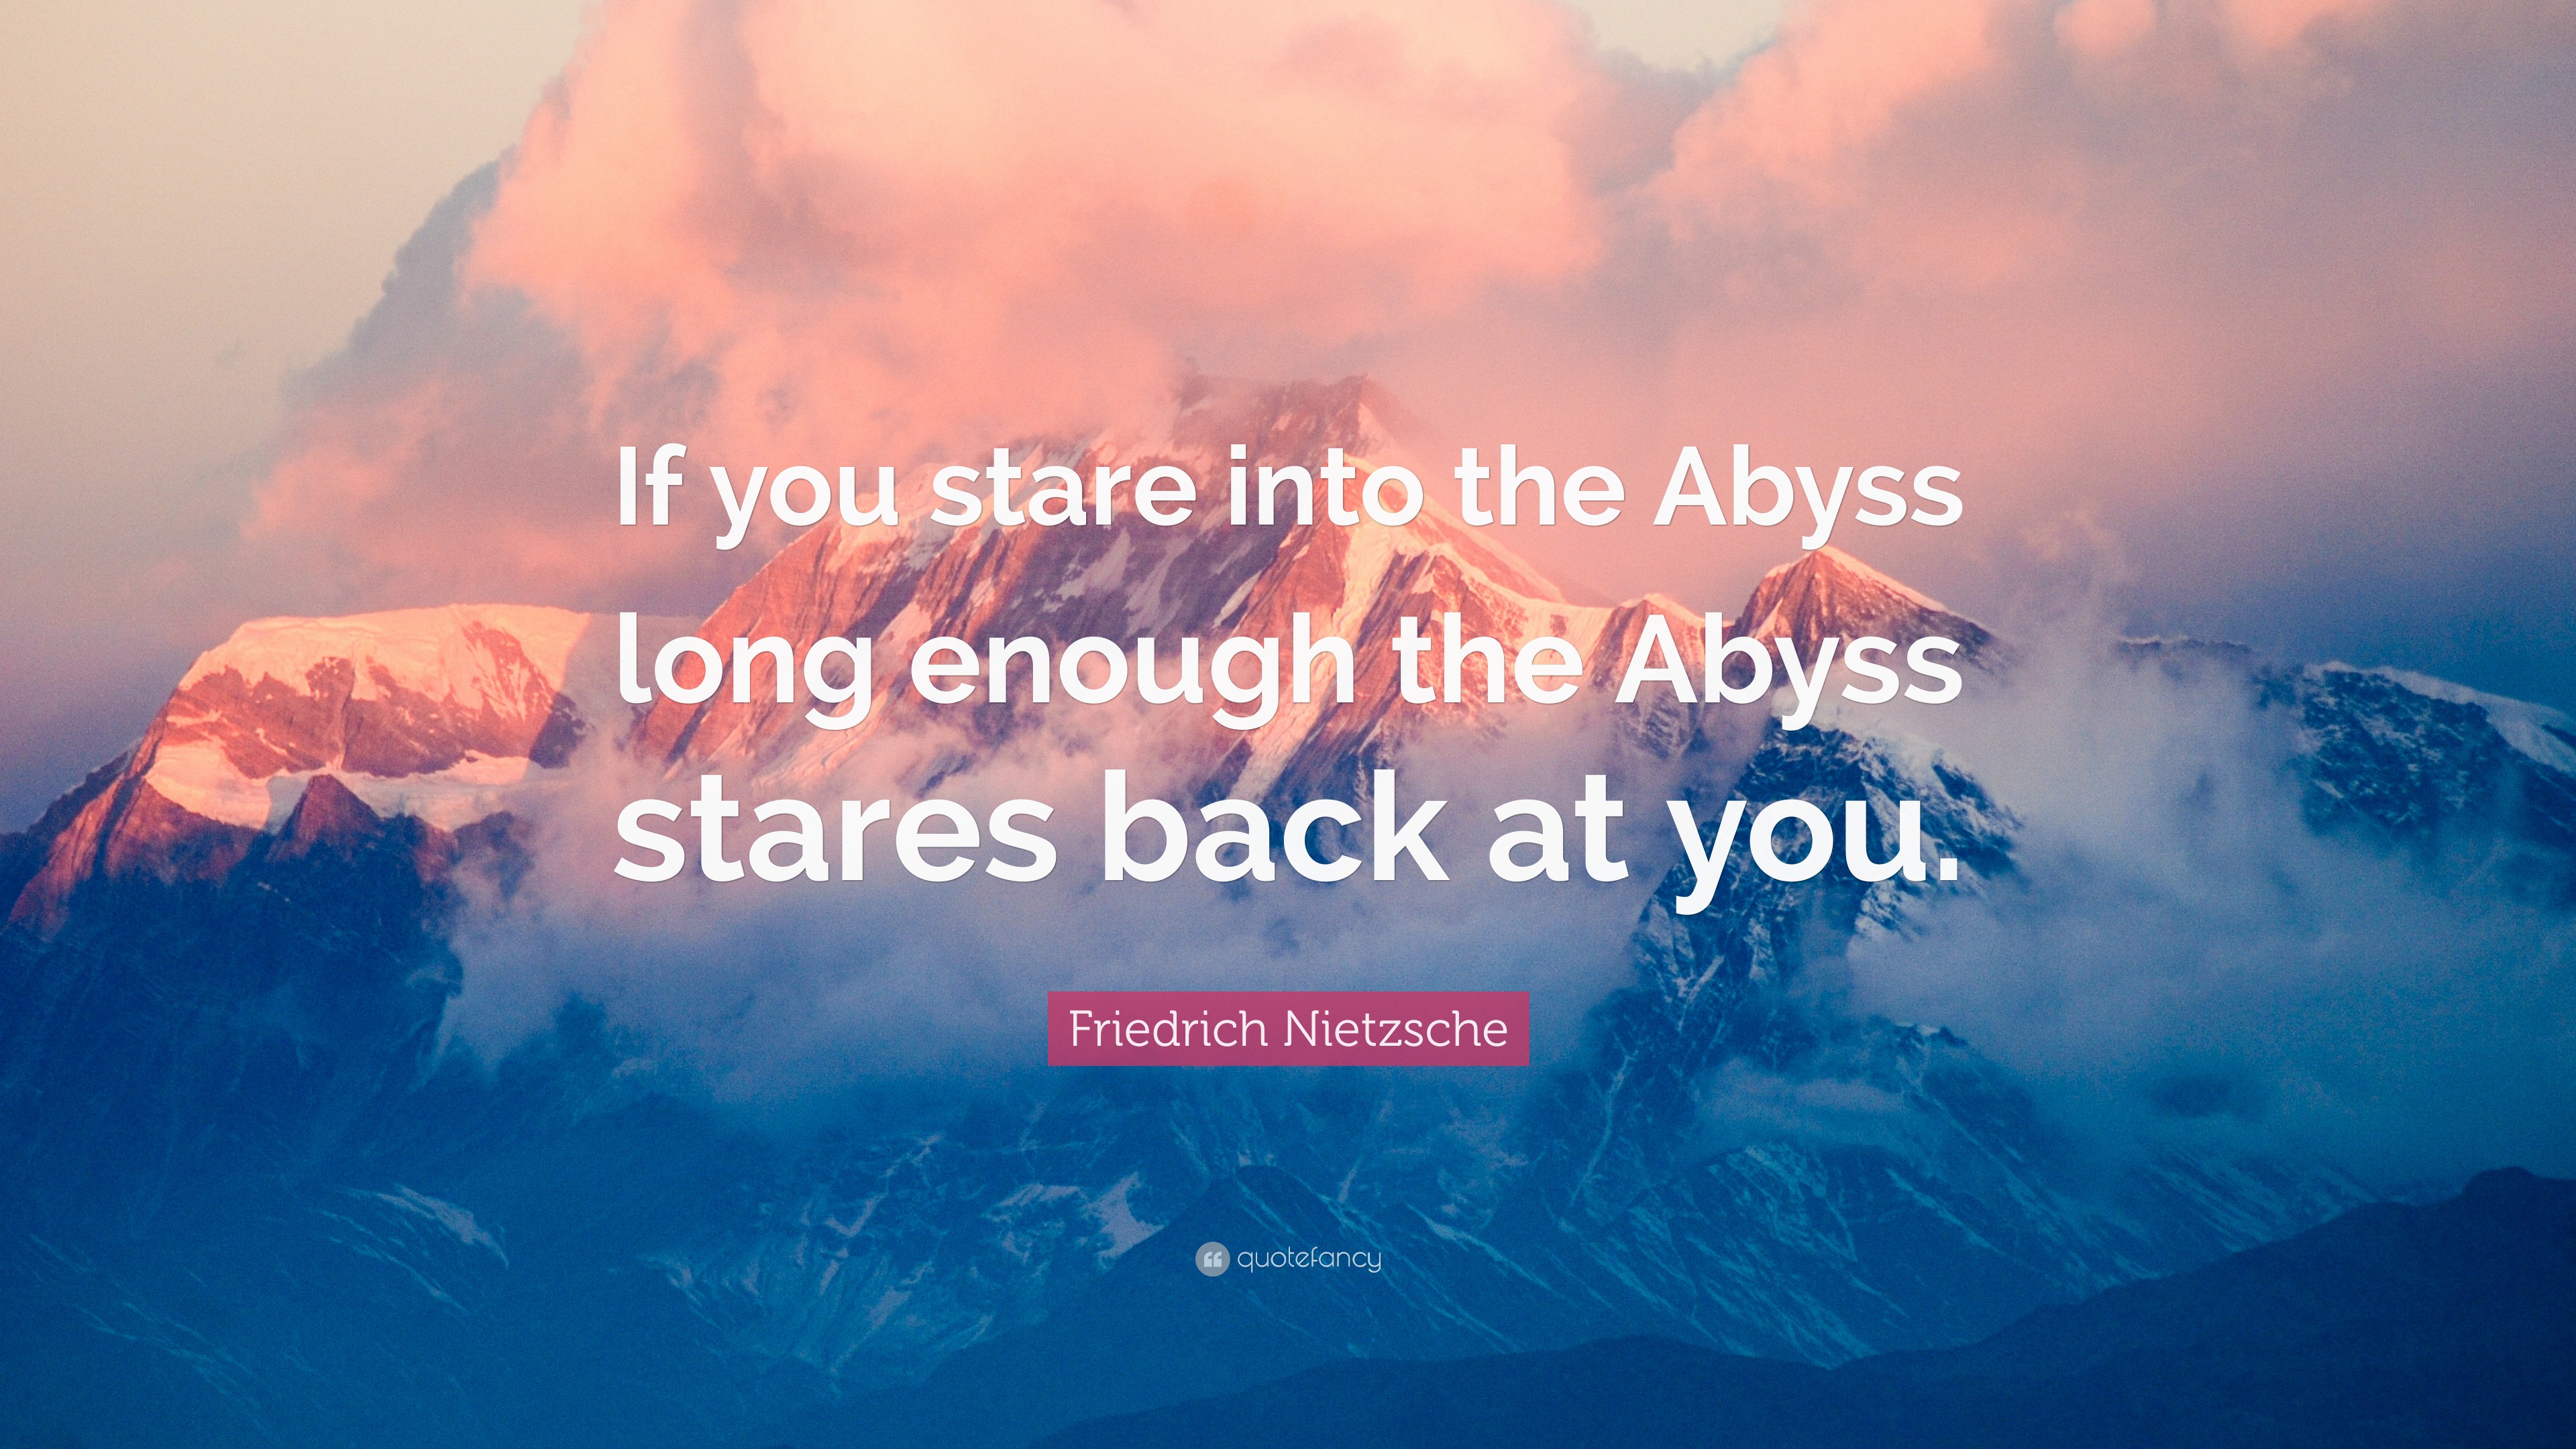 friedrich-nietzsche-quote-if-you-stare-into-the-abyss-long-enough-the